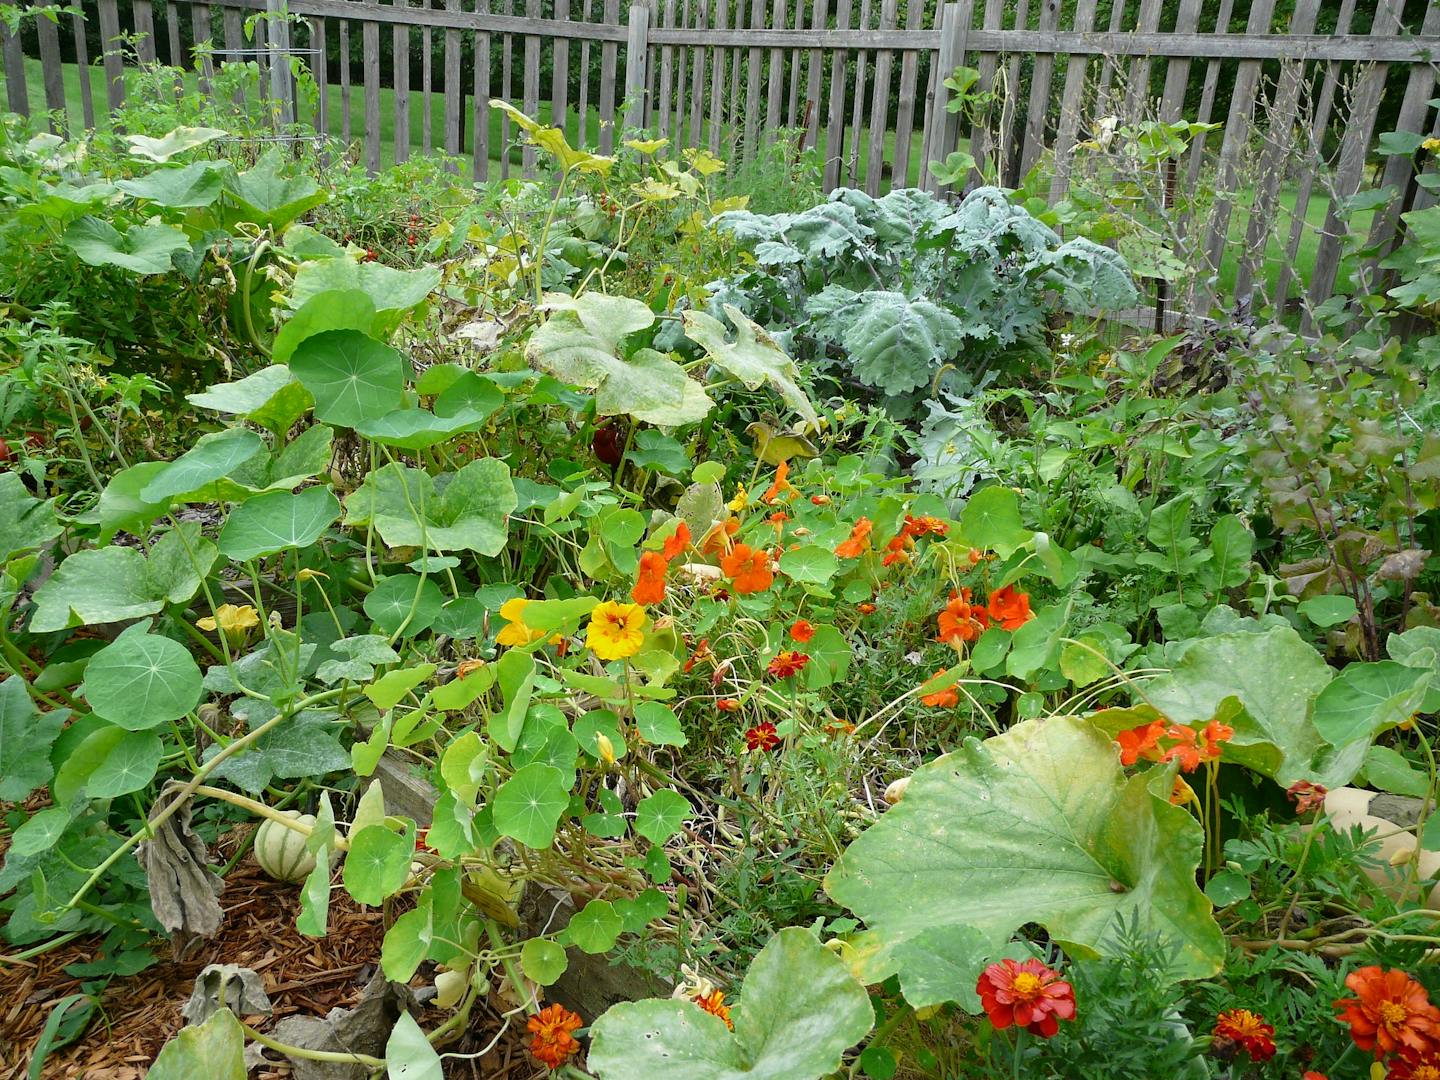 Food insecurity revives the victory gardens movement